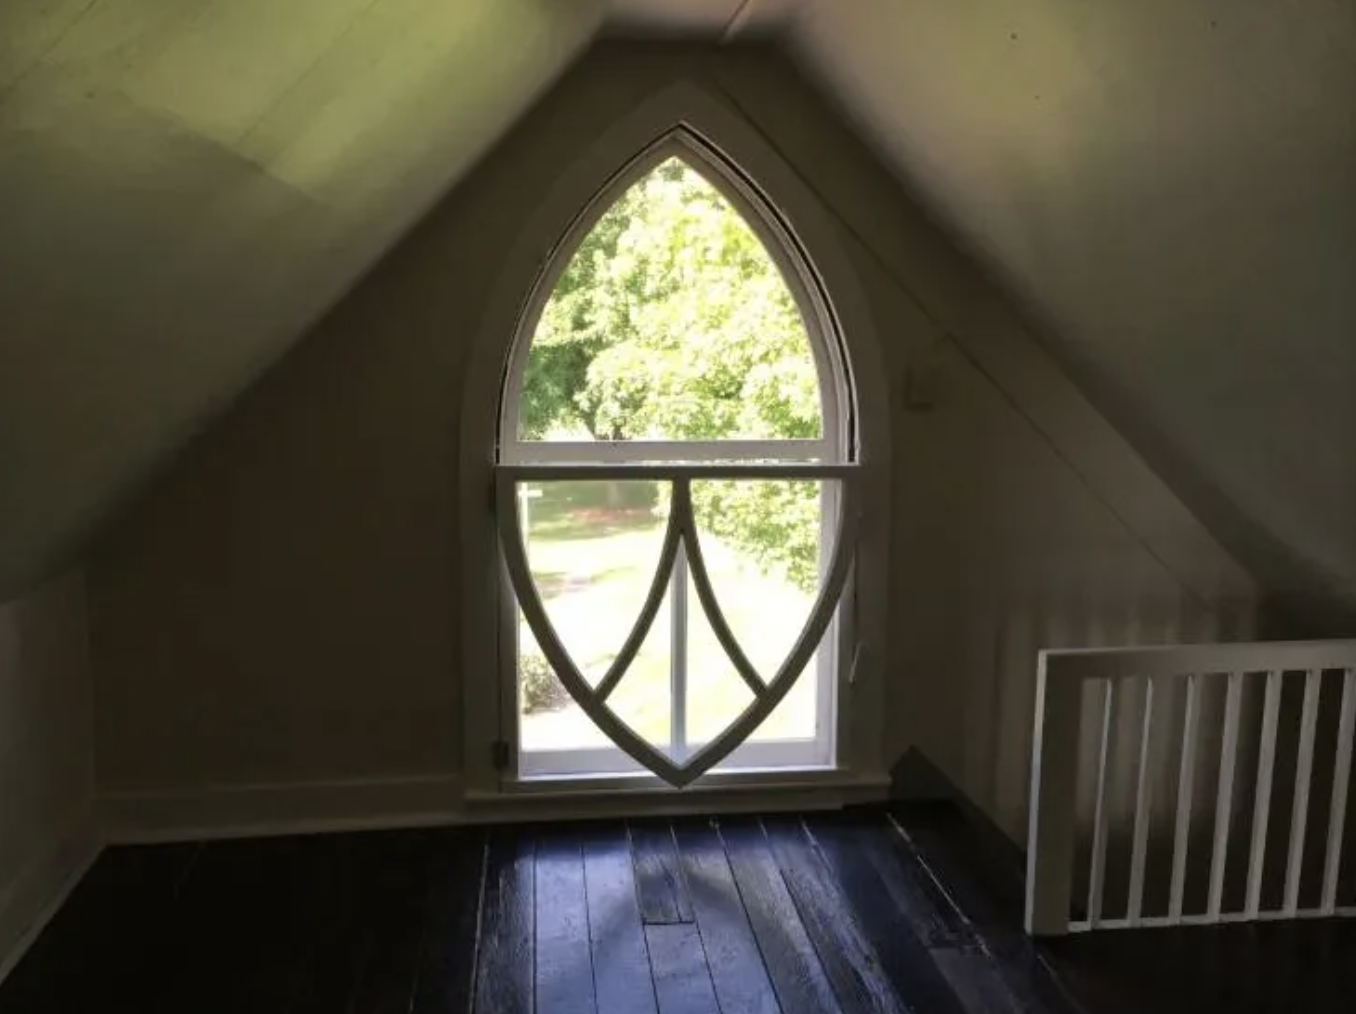 The inside of the attic whose window is seen at the top of the painting in the background